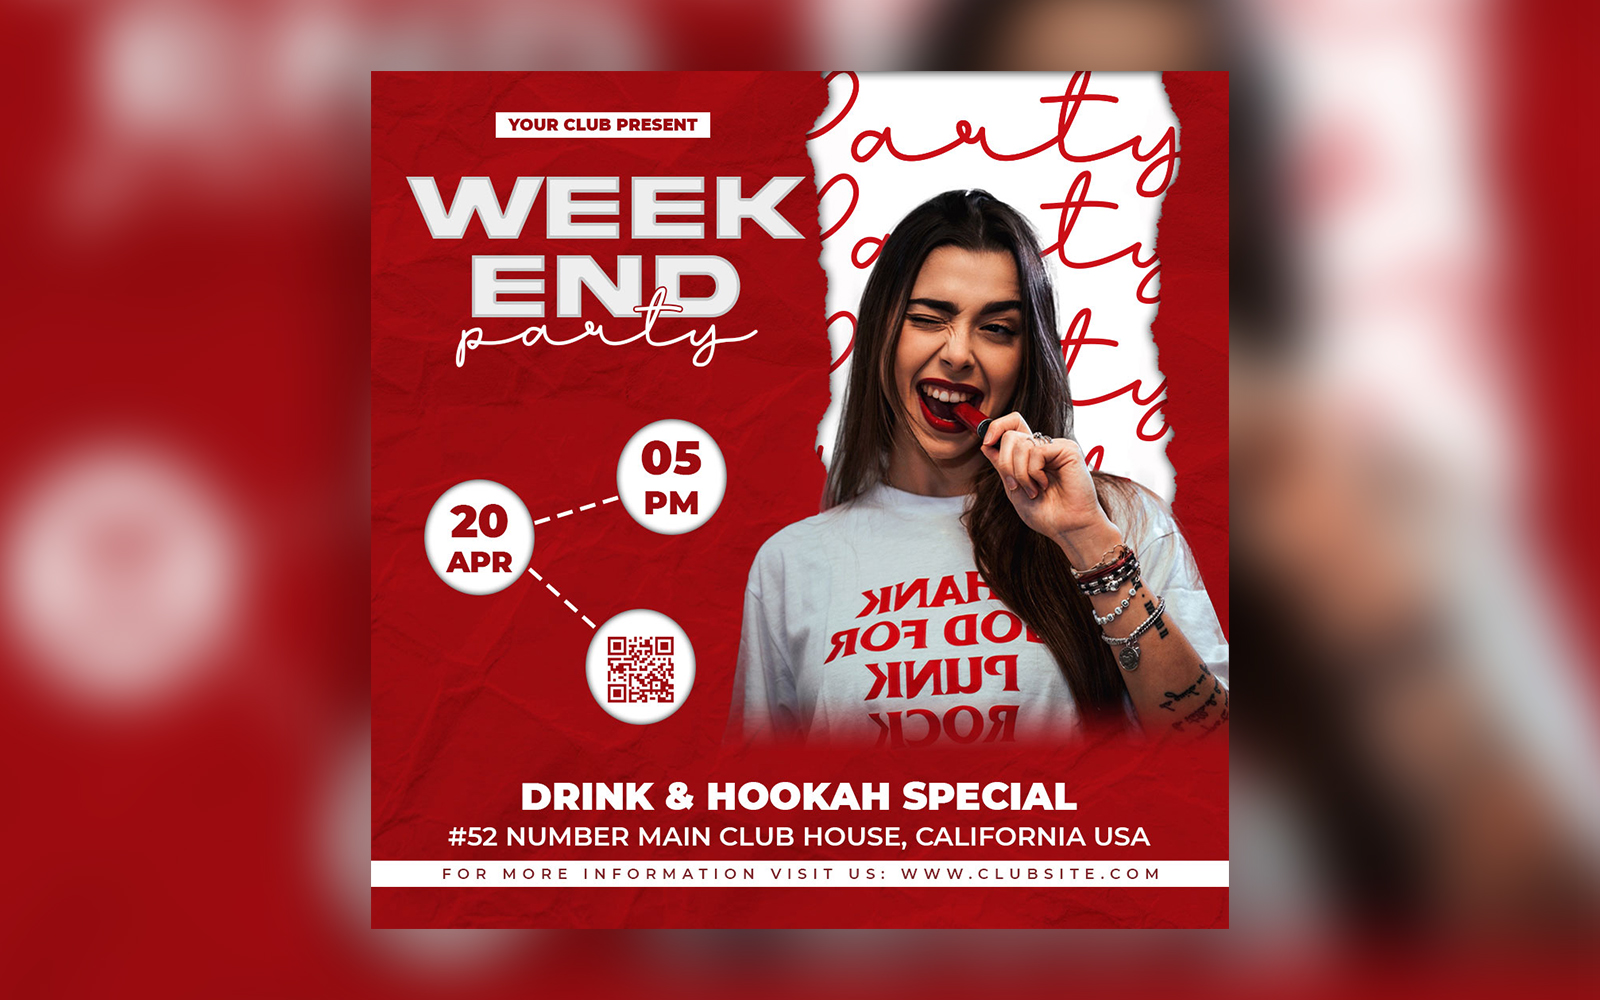 Week End Night Club Party Social Media Banner Post Template